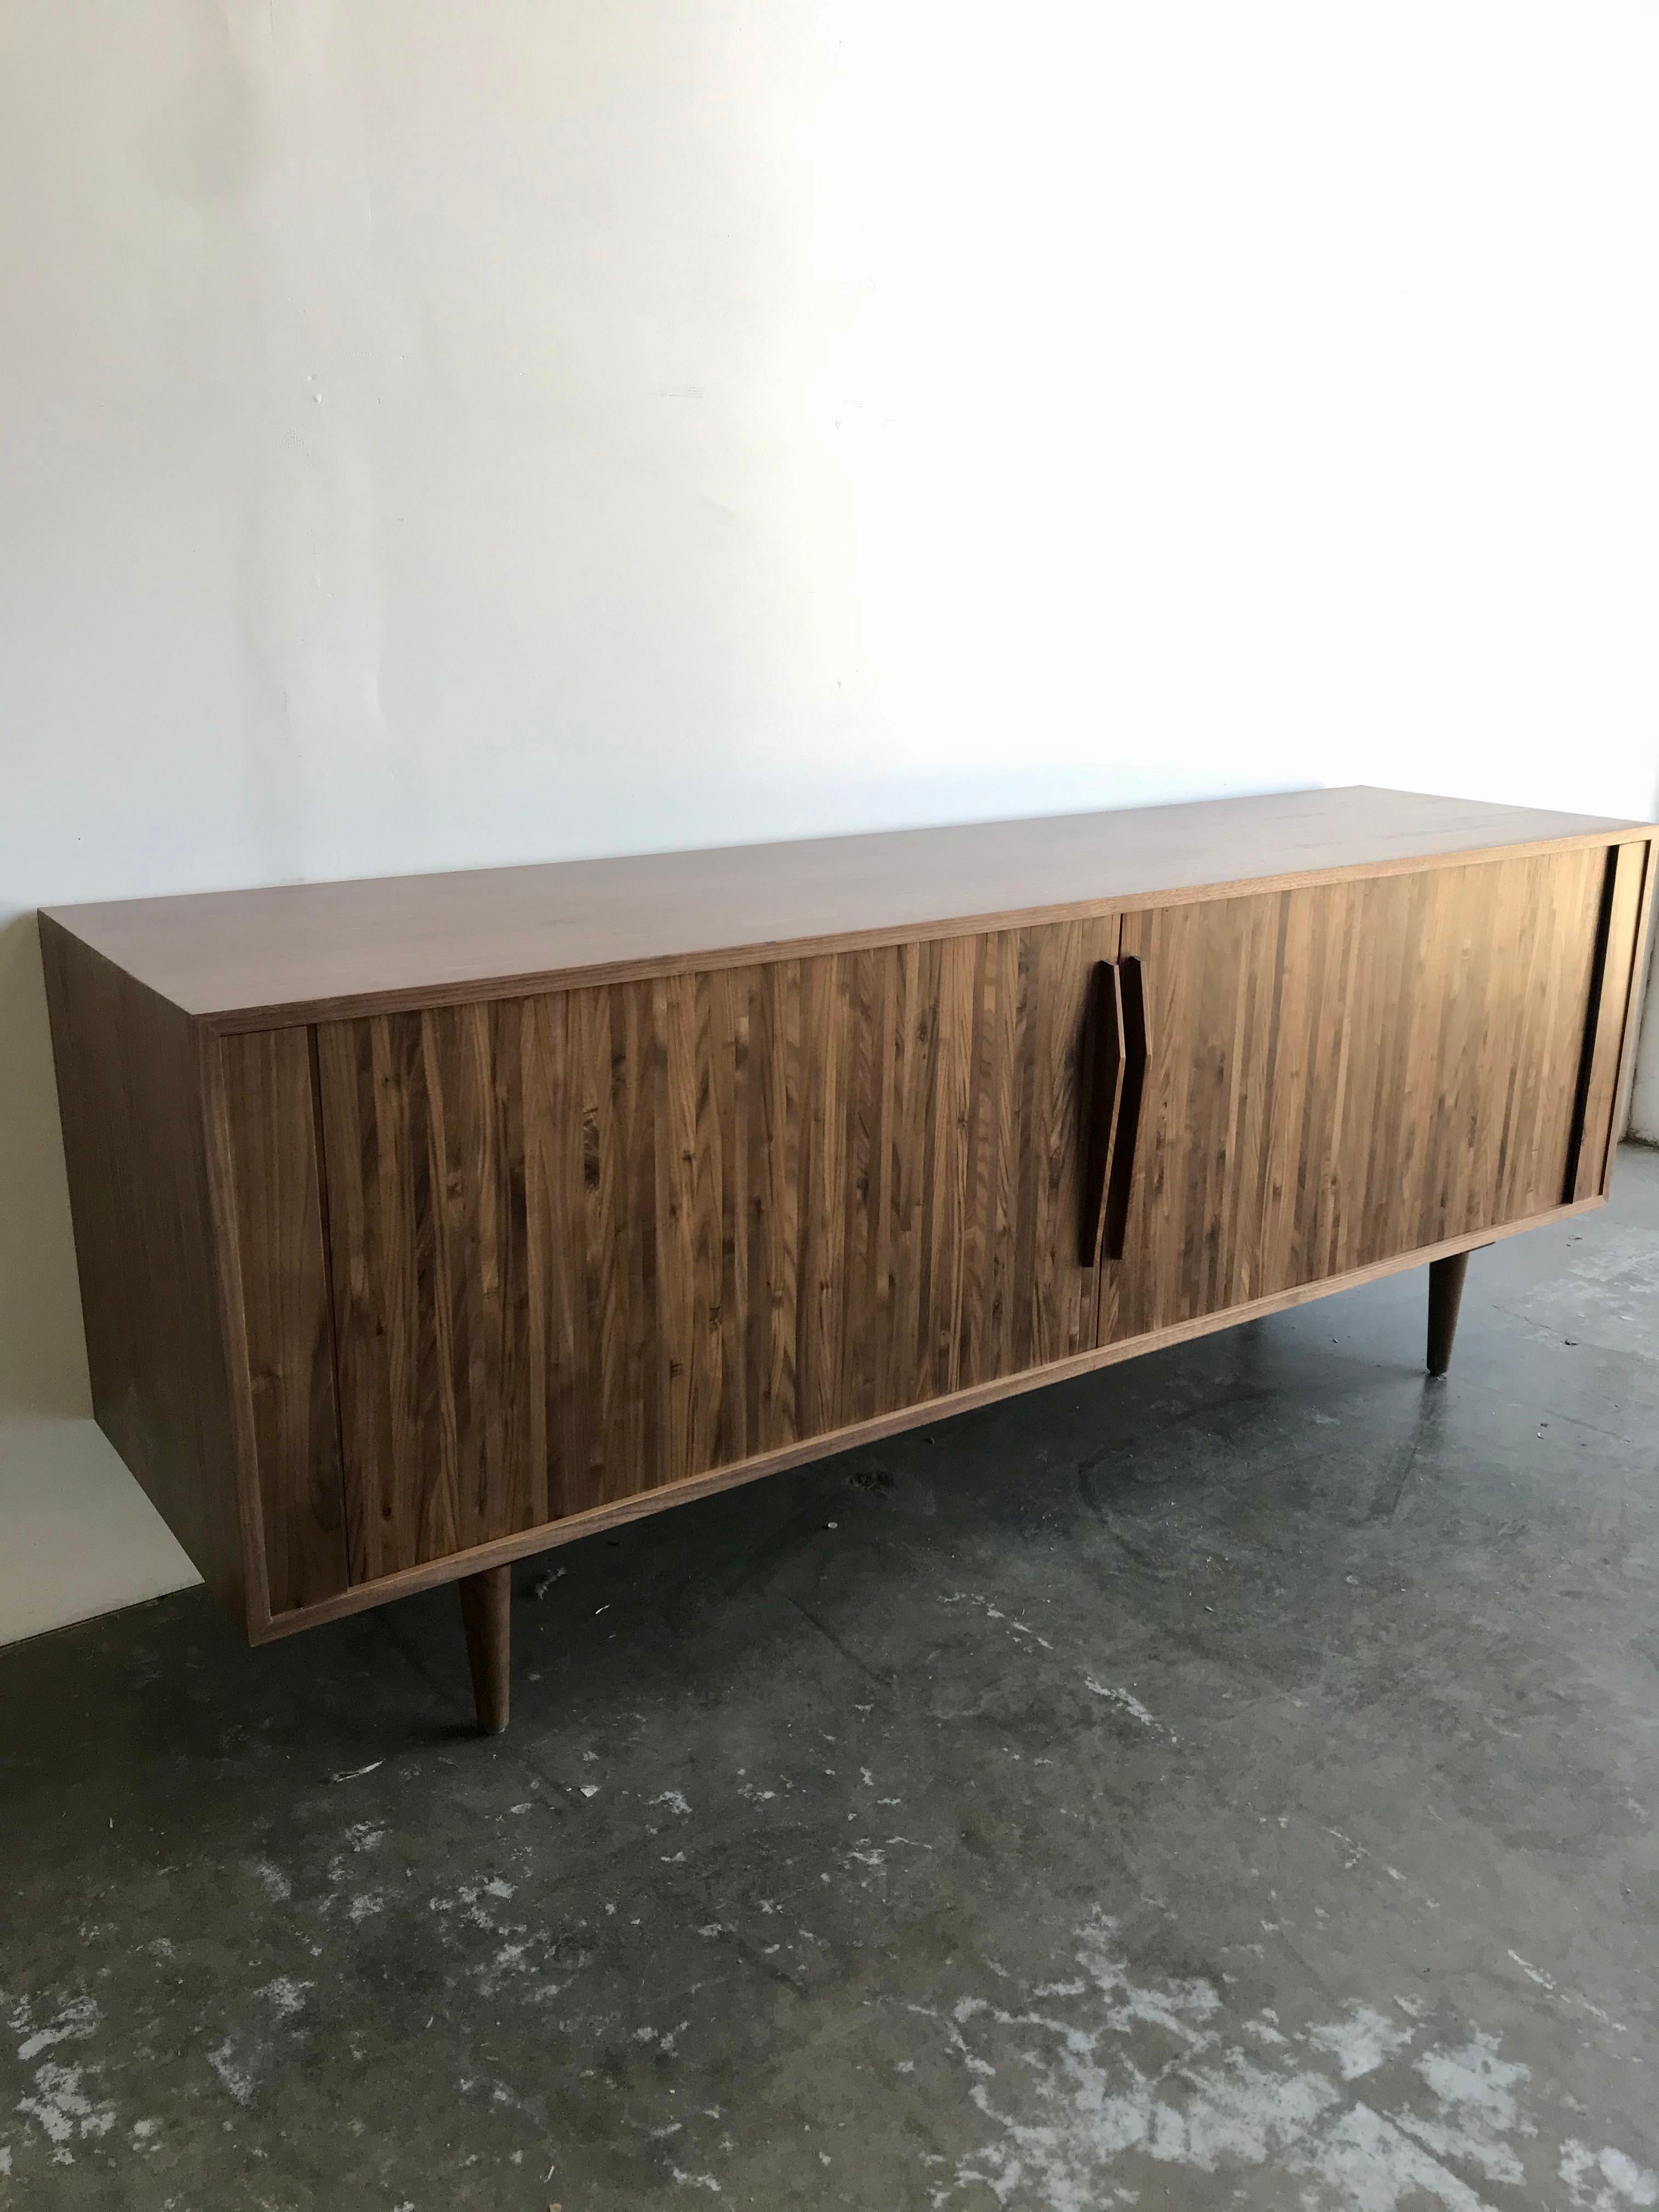 Handcrafted walnut tambour credenza. Items were built in house for a staging job. Items have been on displays with very little use and is in like new condition. Items offer ample hidden storage with both vertical and horizontal dividers behind